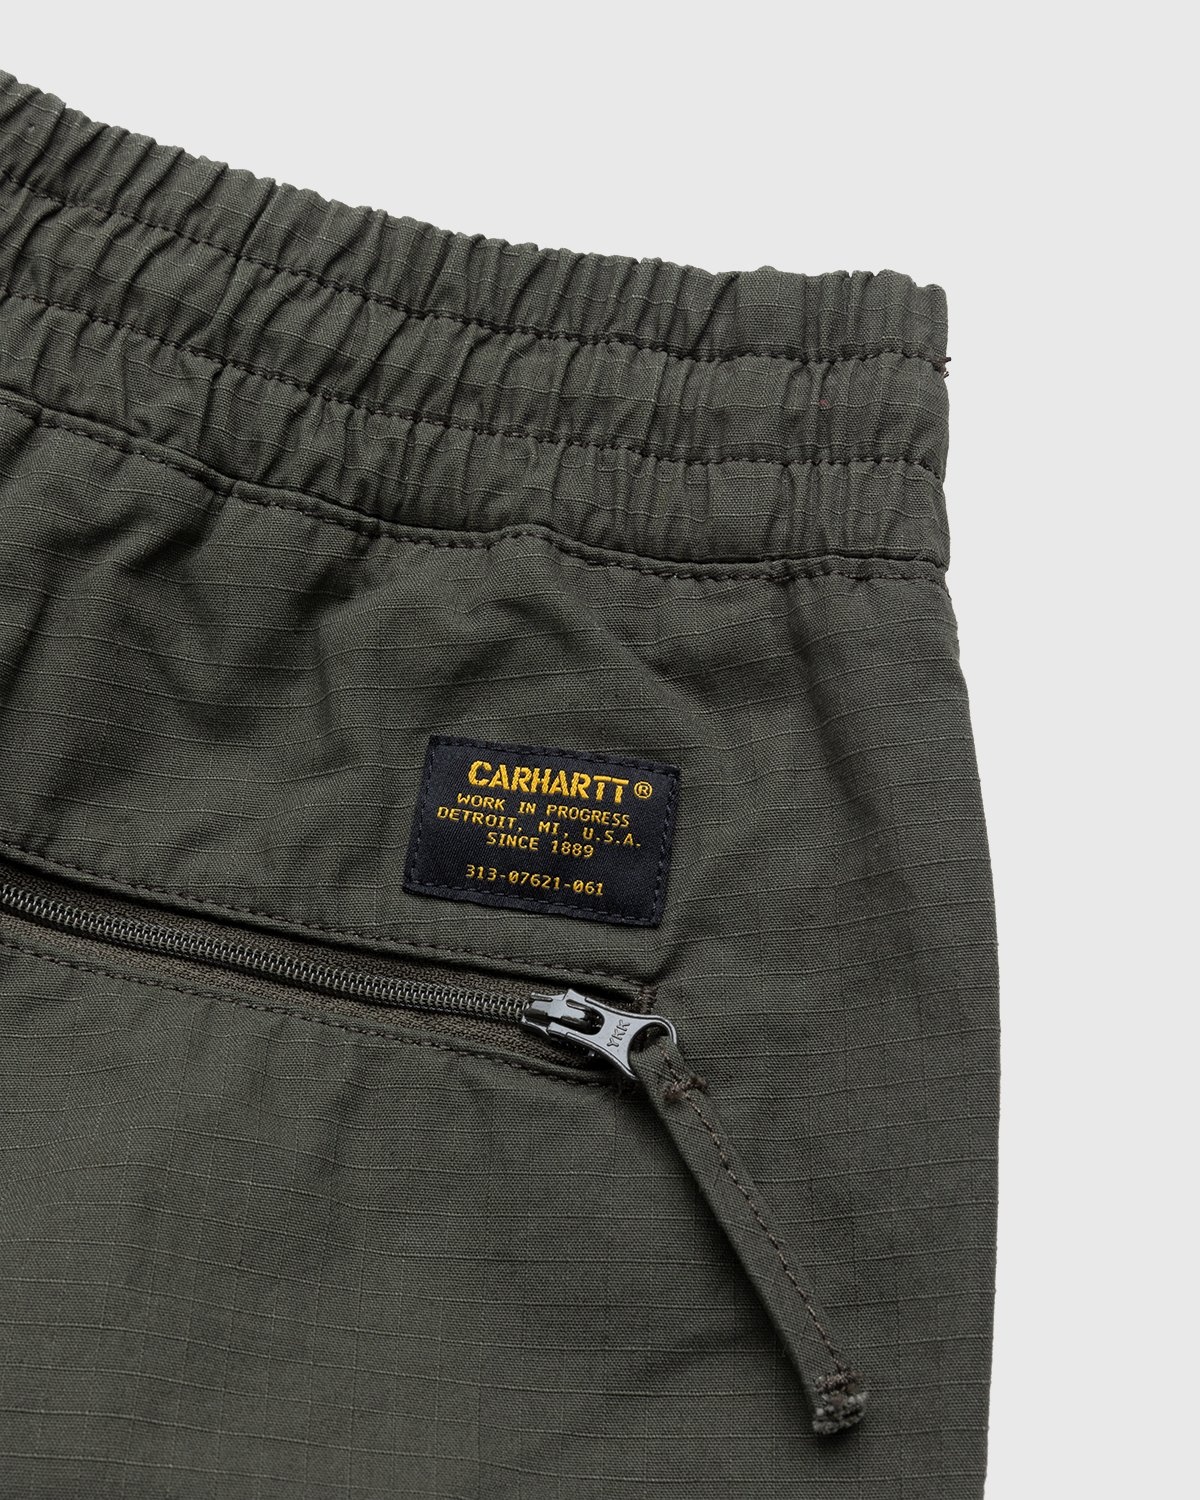 Carhartt WIP – Cargo Jogger Cypress Rinsed - Cargo Pants - Green - Image 3